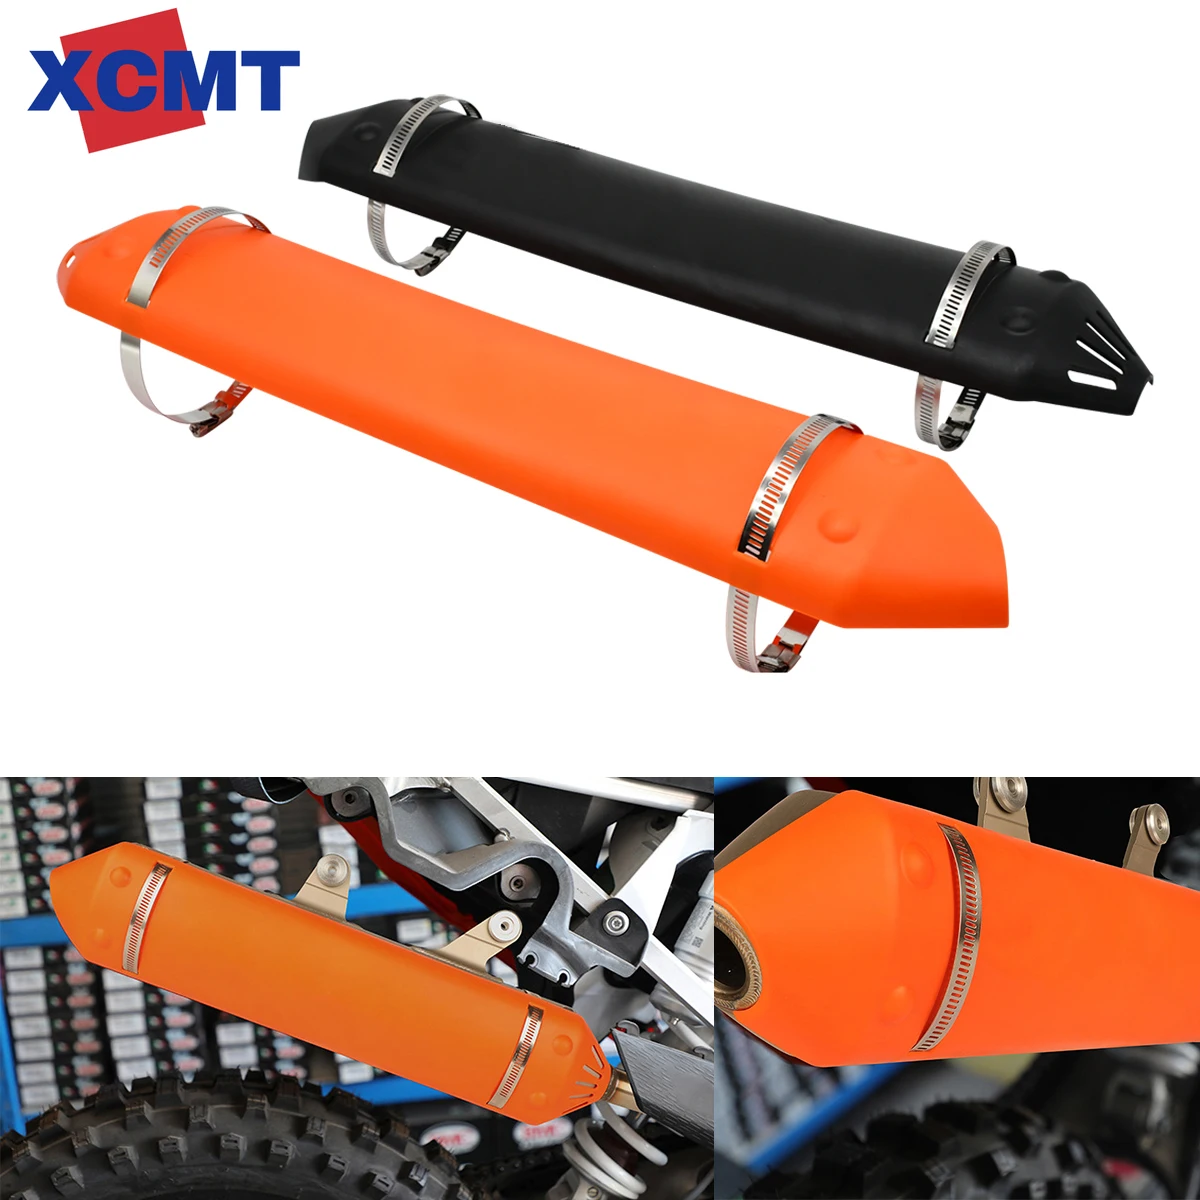 

Exhaust Muffler Pipe Heat Shield Cover Guard For KTM 250 300 XC XCW TPI 2020-2022 250 300 XCW 2023 300 XCW TPI Erzbergrodeo 2020